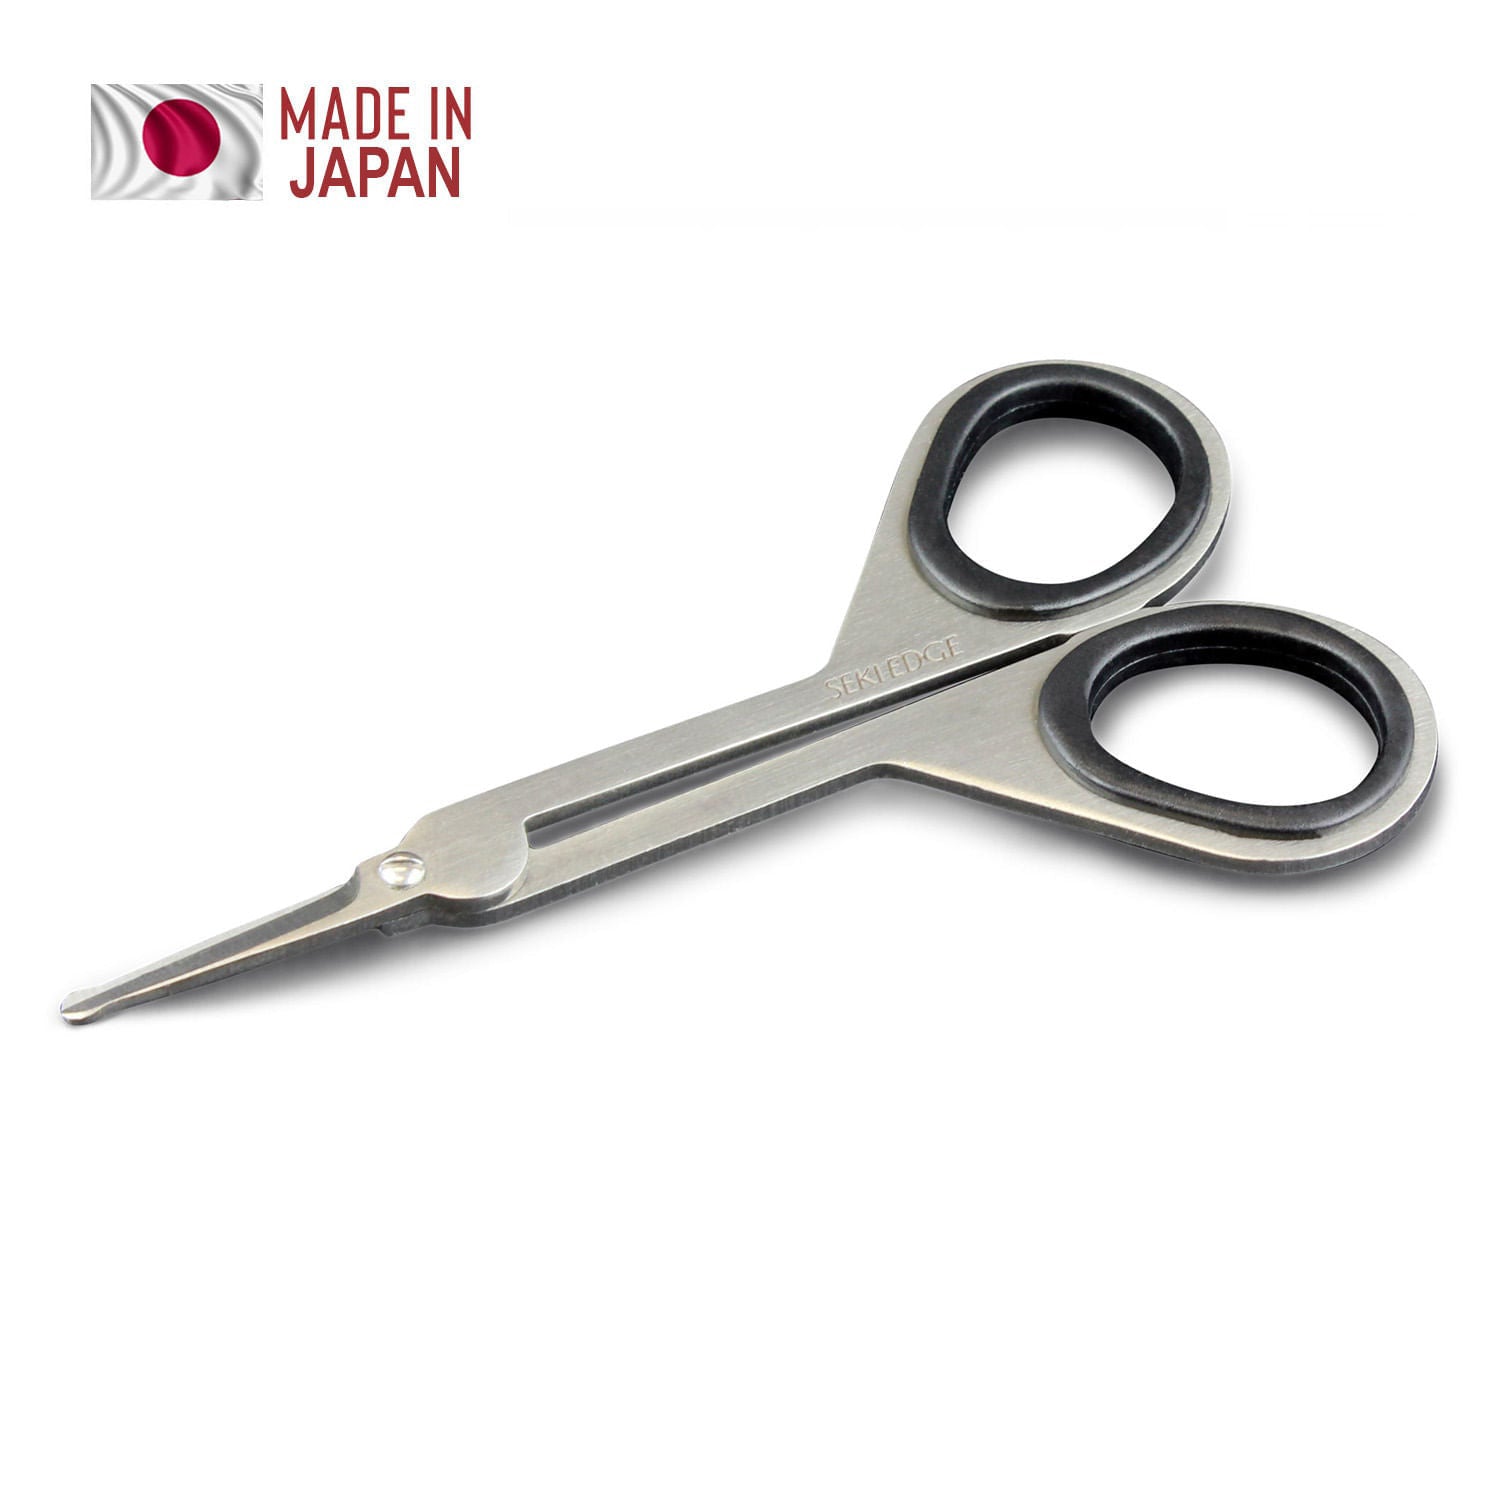 Good Japanese scissors for cutting rubbers